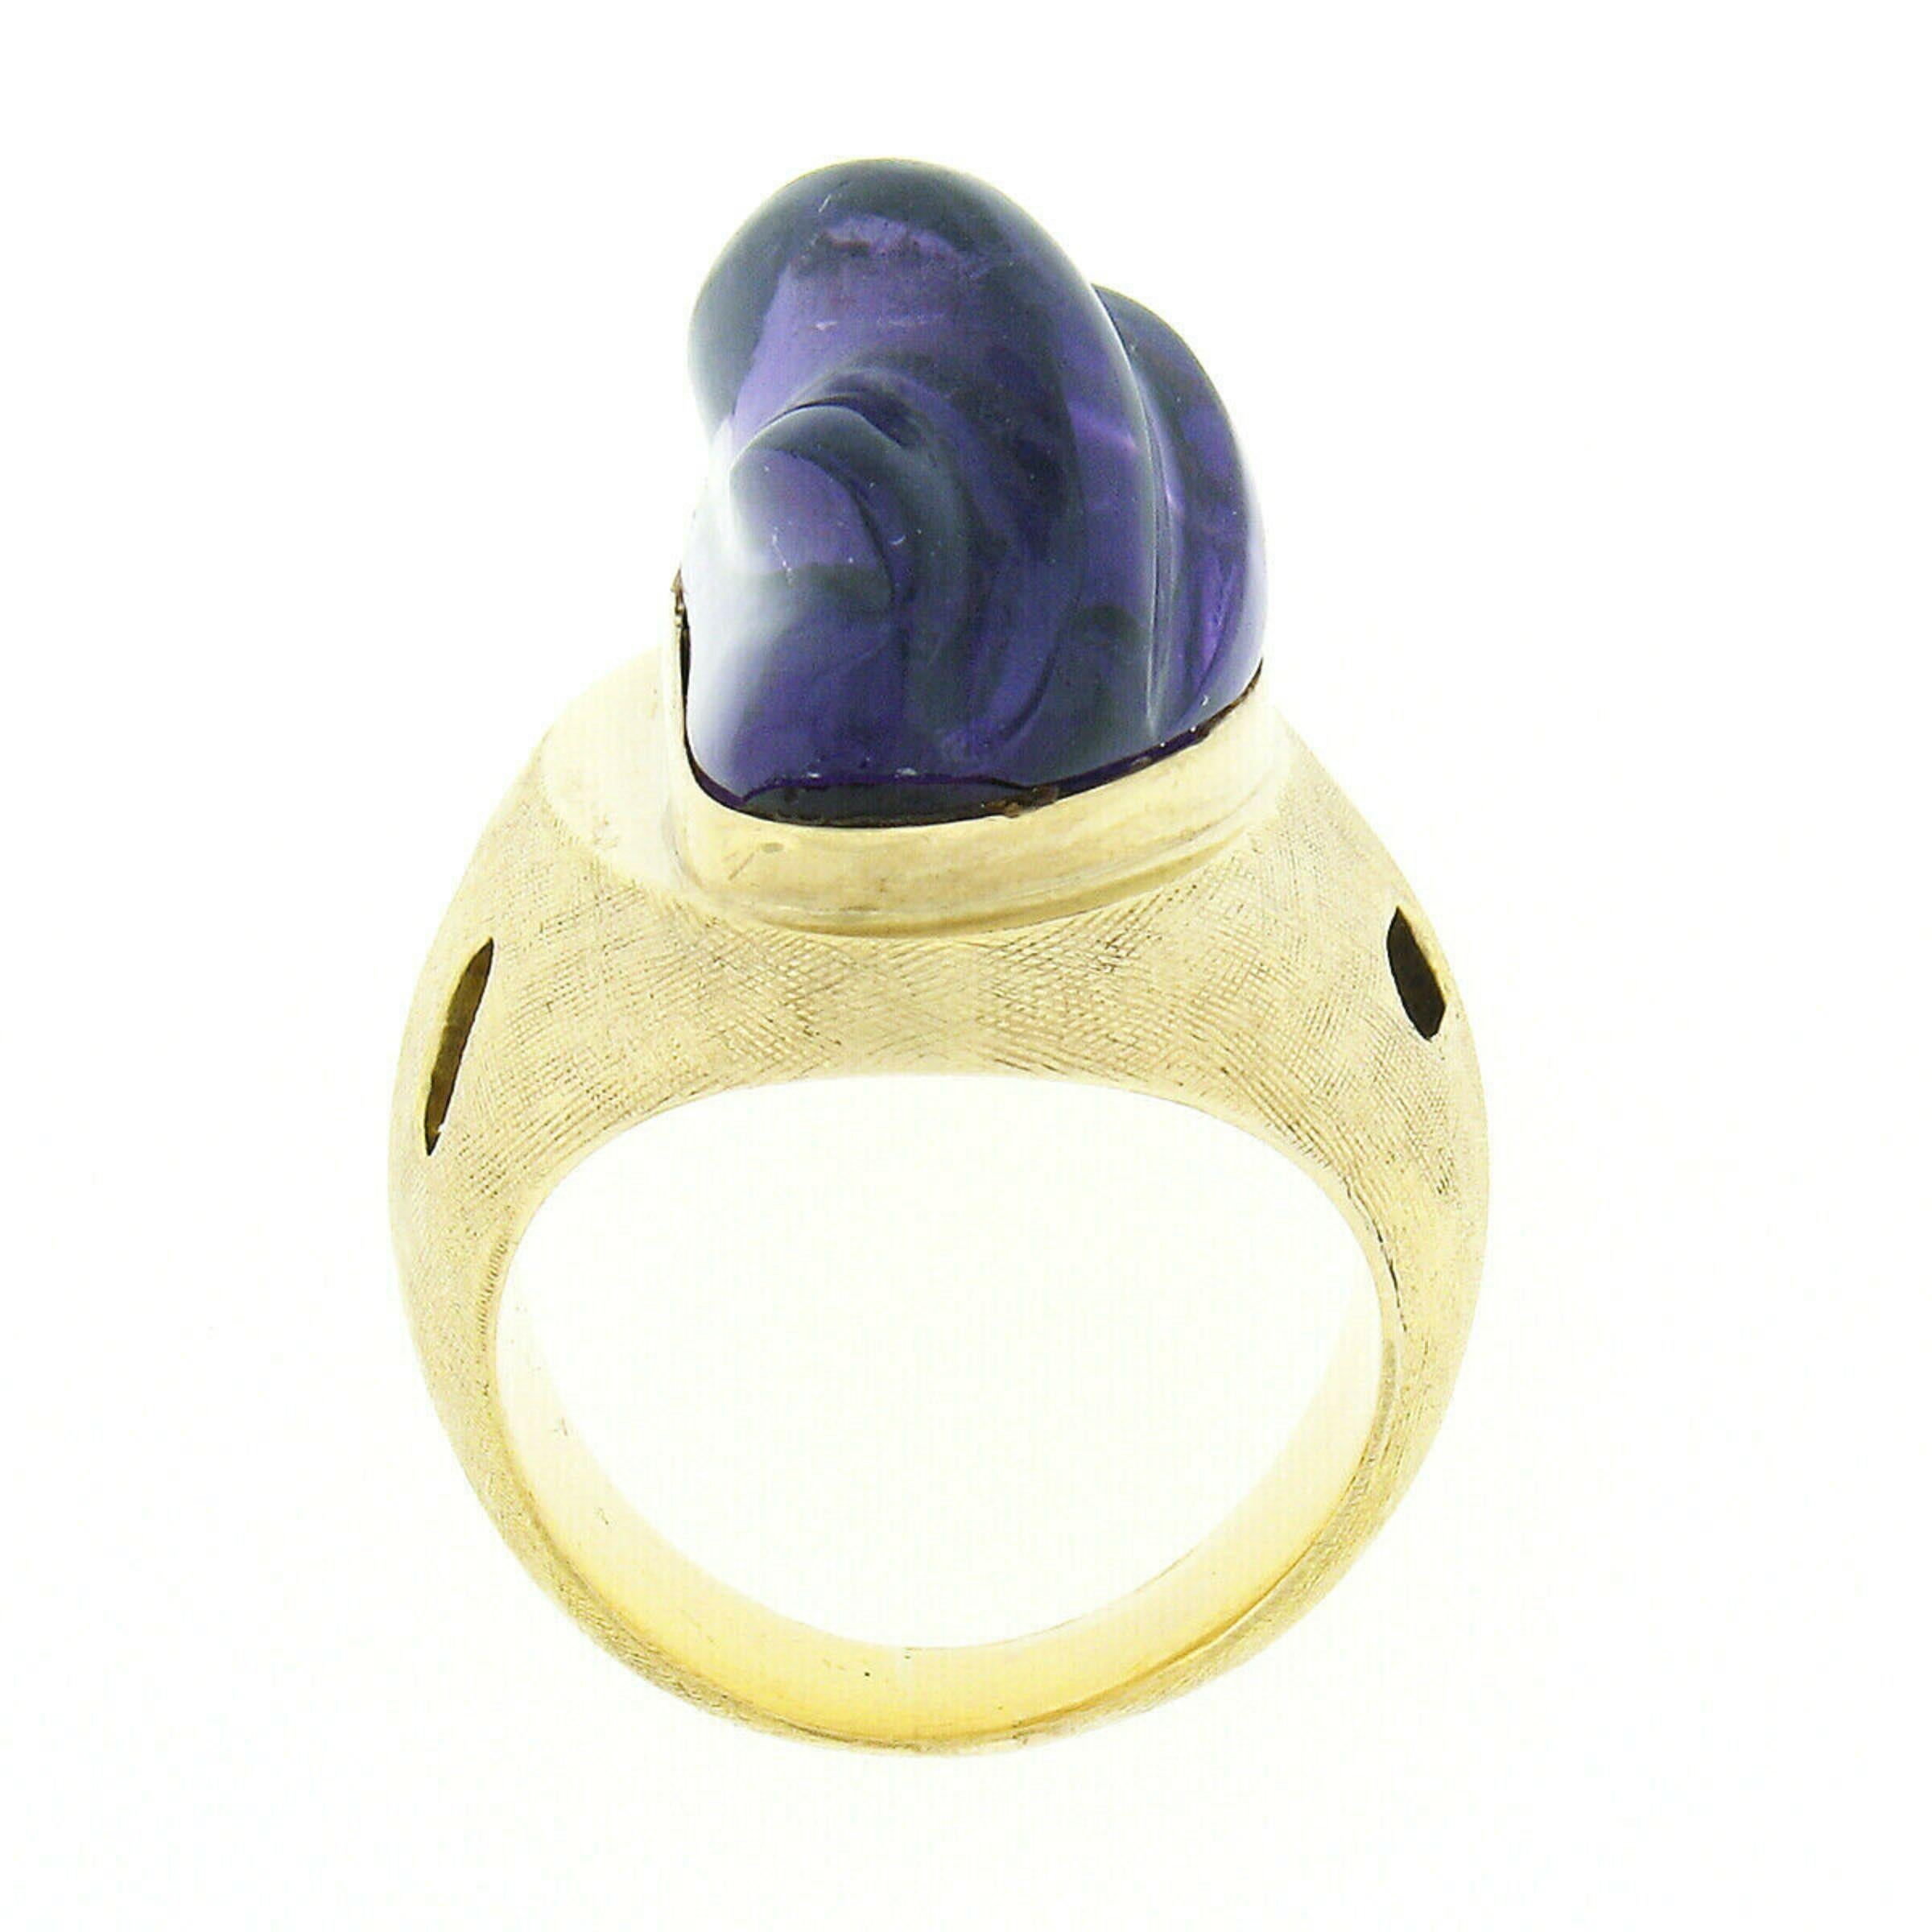 Cabochon Collectible Modernist Burle Marx 18k Gold Carved Amethyst Florentine Finish Ring For Sale